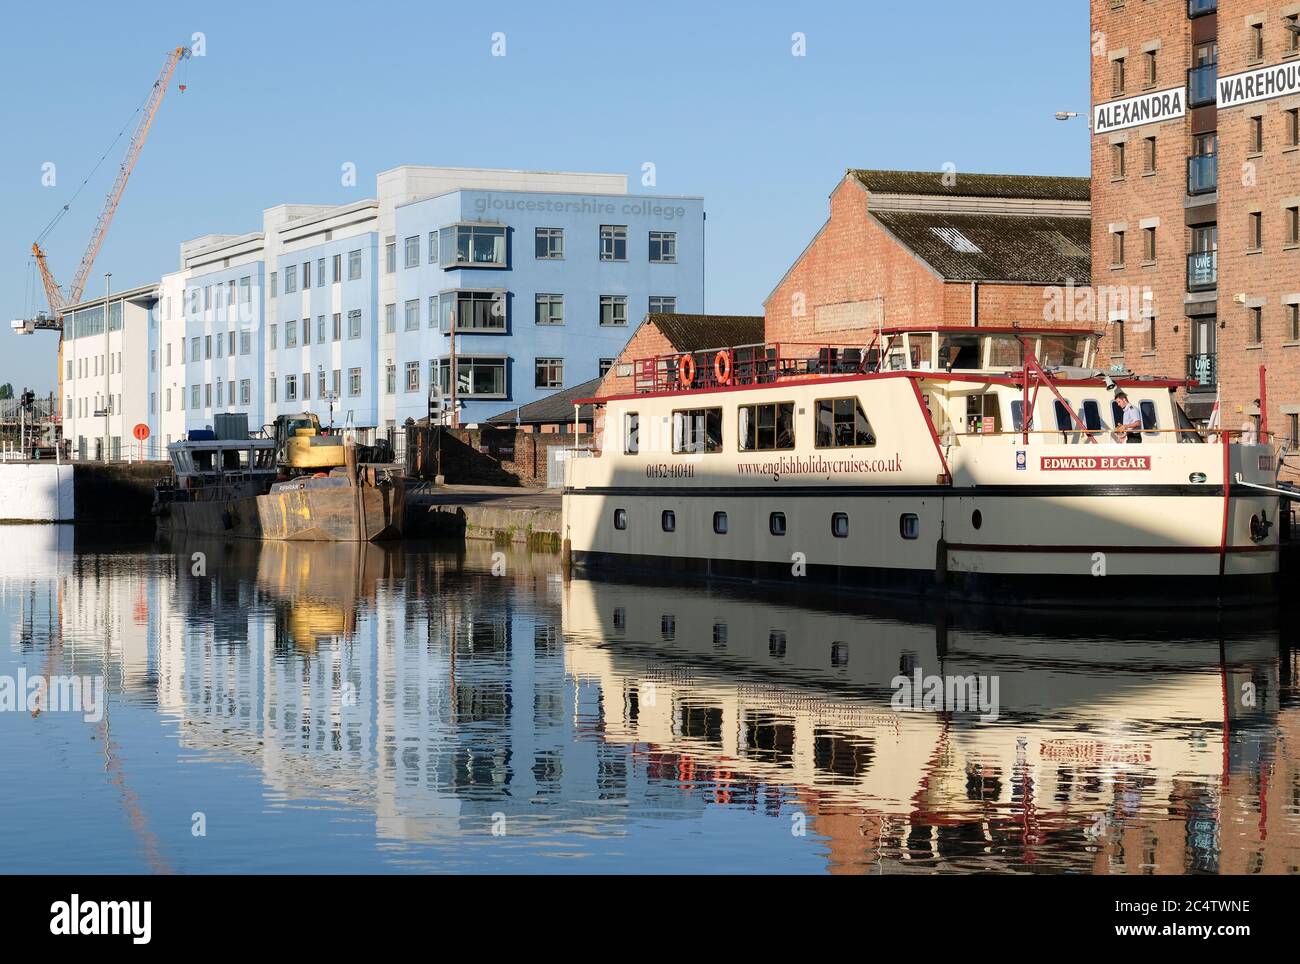 Views of the Main Basin of Gloucester Docks on the Gloucester and Sharpness Canal in souther England Stock Photo